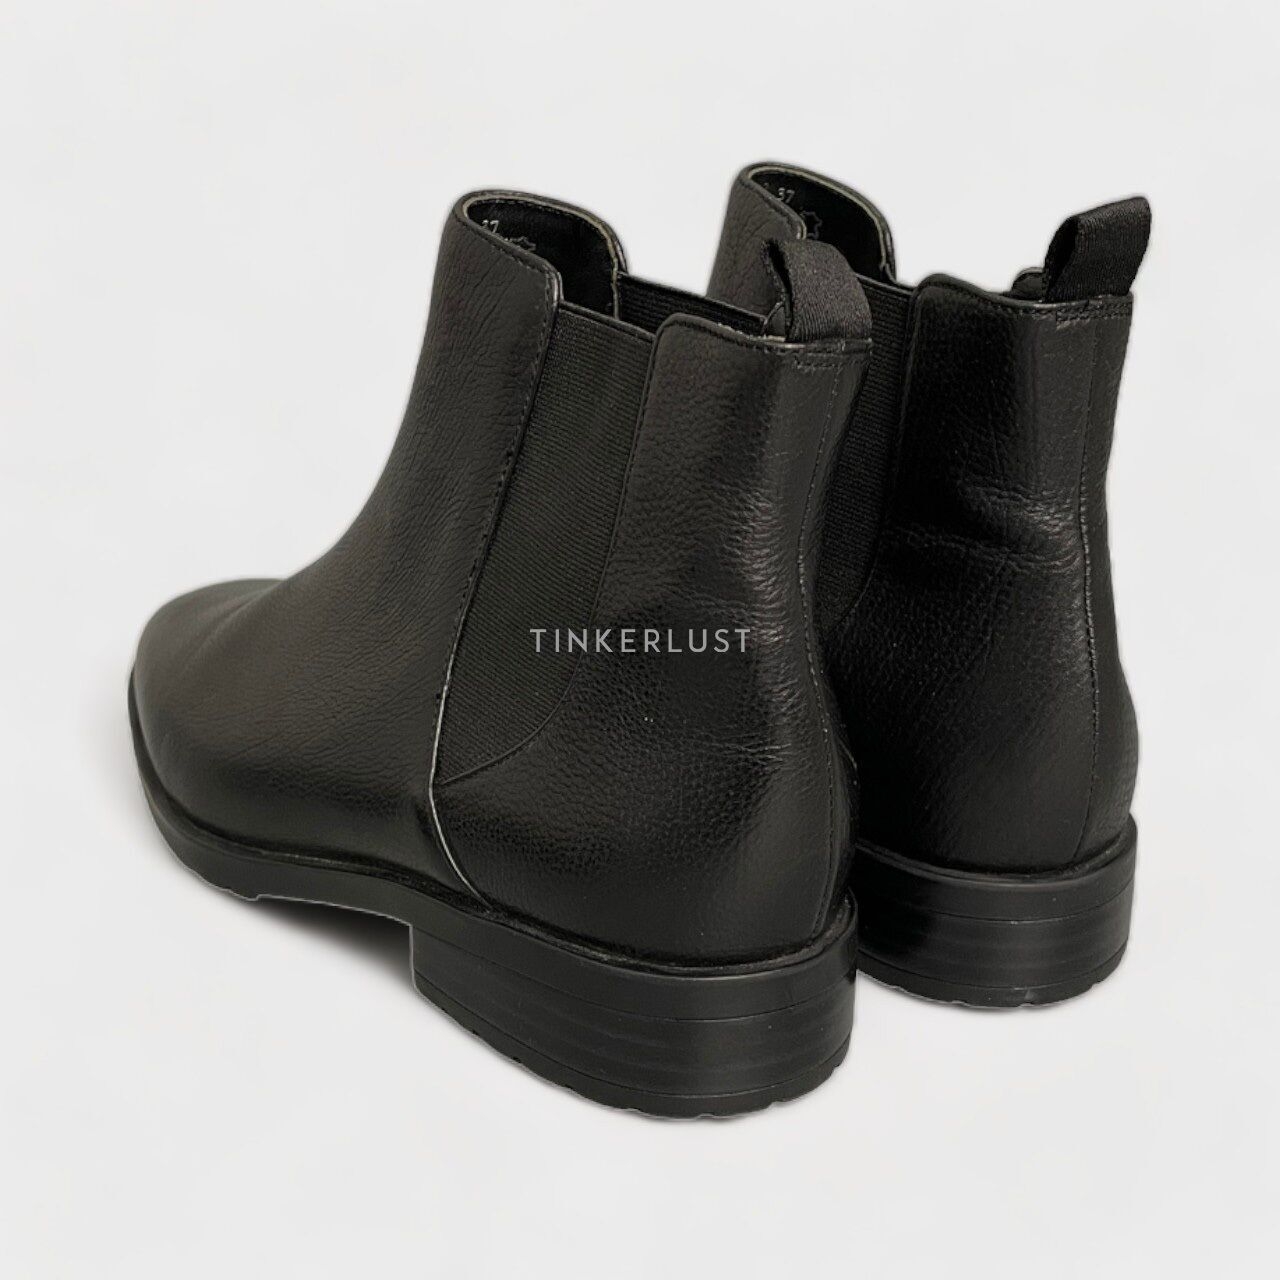 Staccato Black Boots